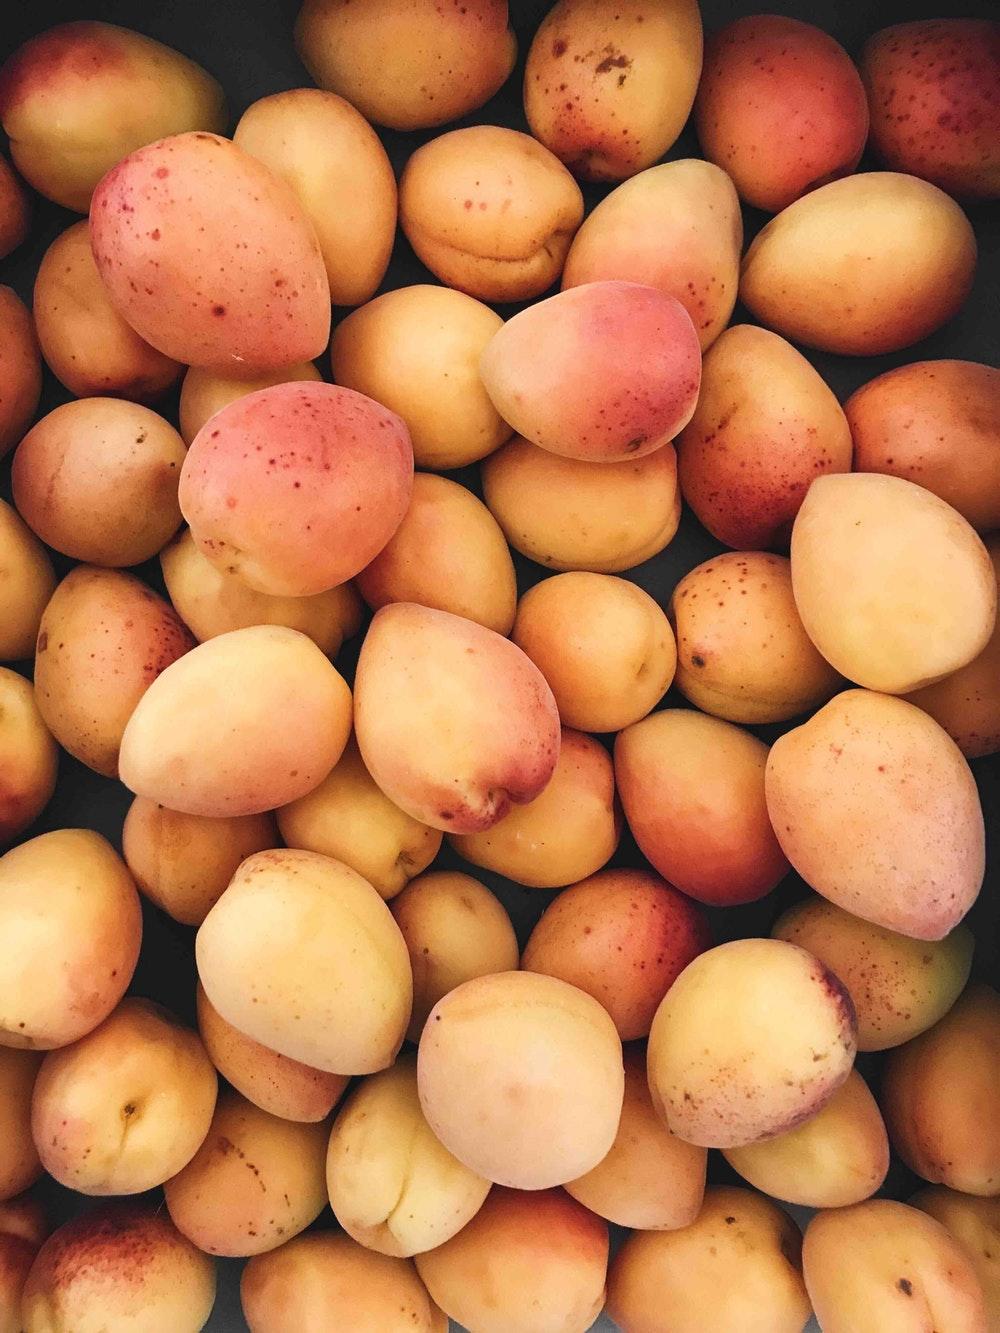 Peaches Picture. Download Free Image